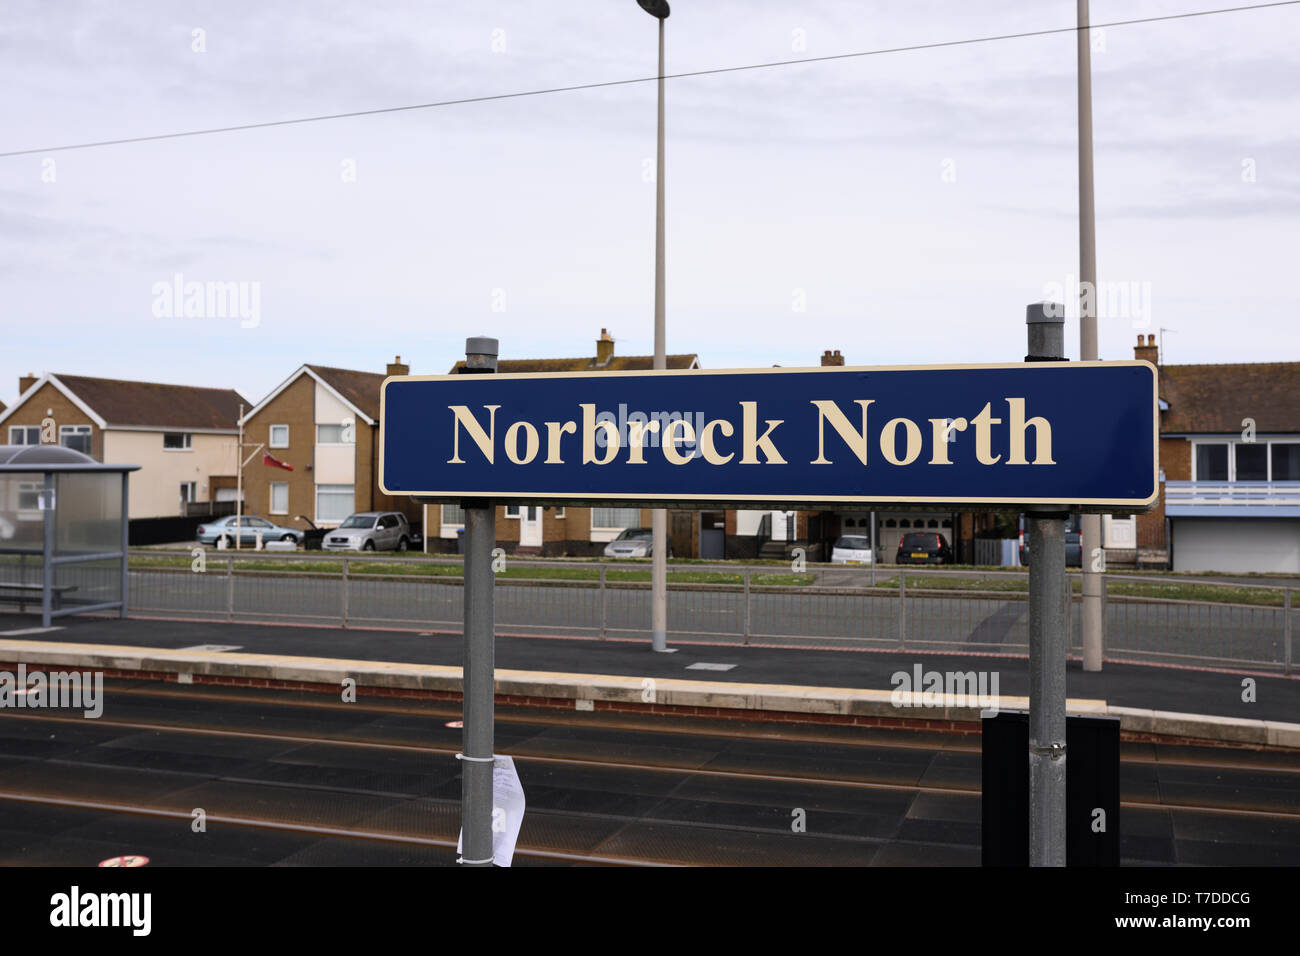 Norbreck North tram stop sign on Blackpool and Fleetwood tramway with road and houses in background on the fylde coast in lancashire uk Stock Photo